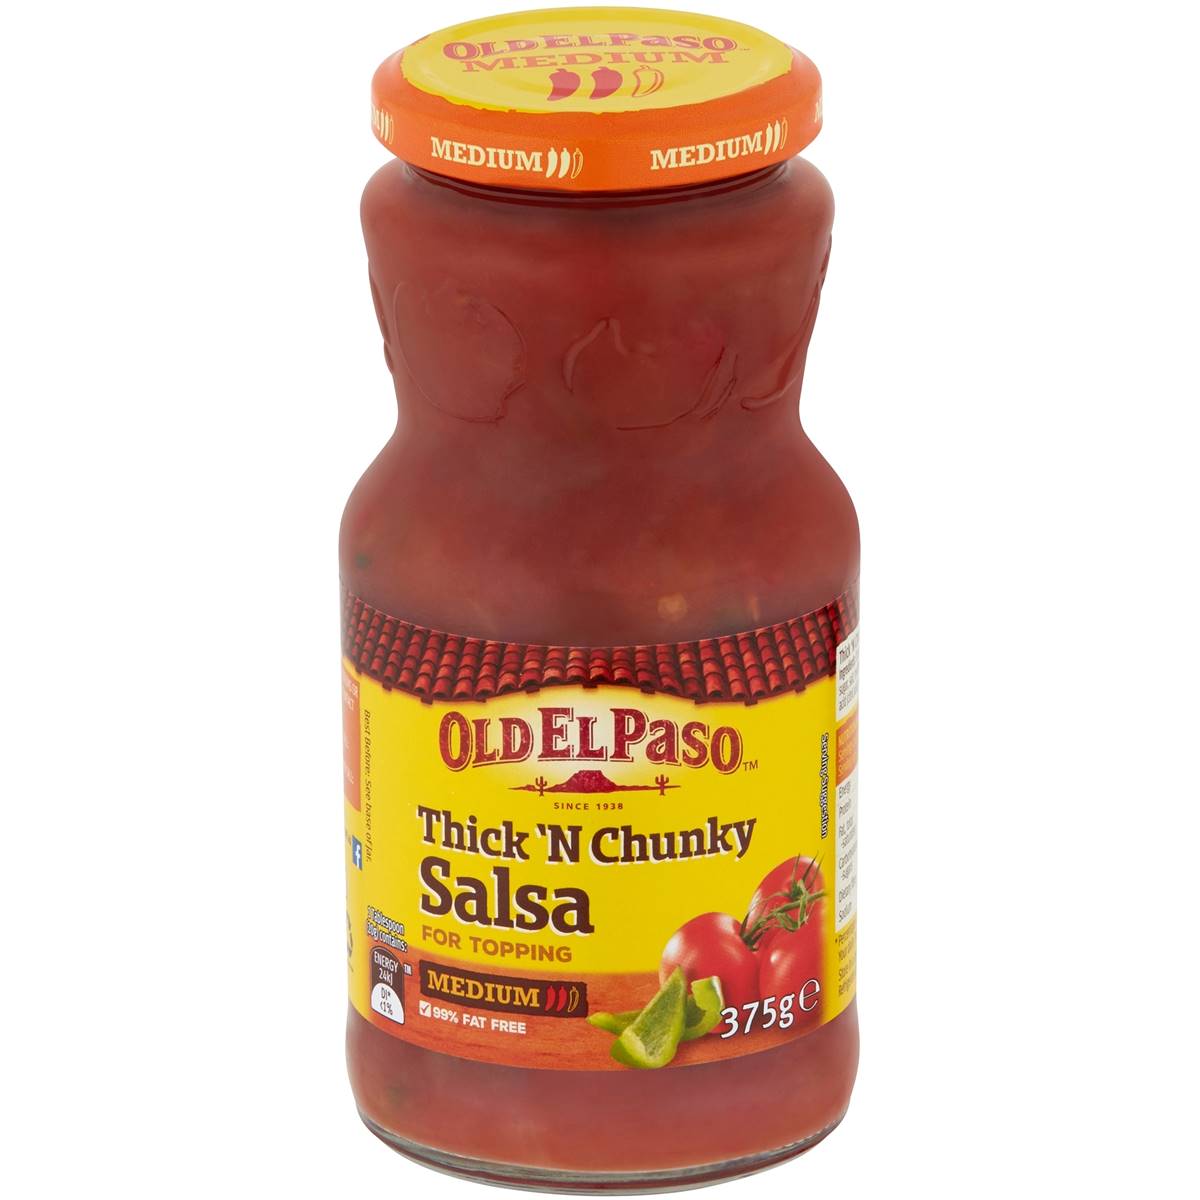 Calories in Old El Paso Medium Salsa Thick & Chunky